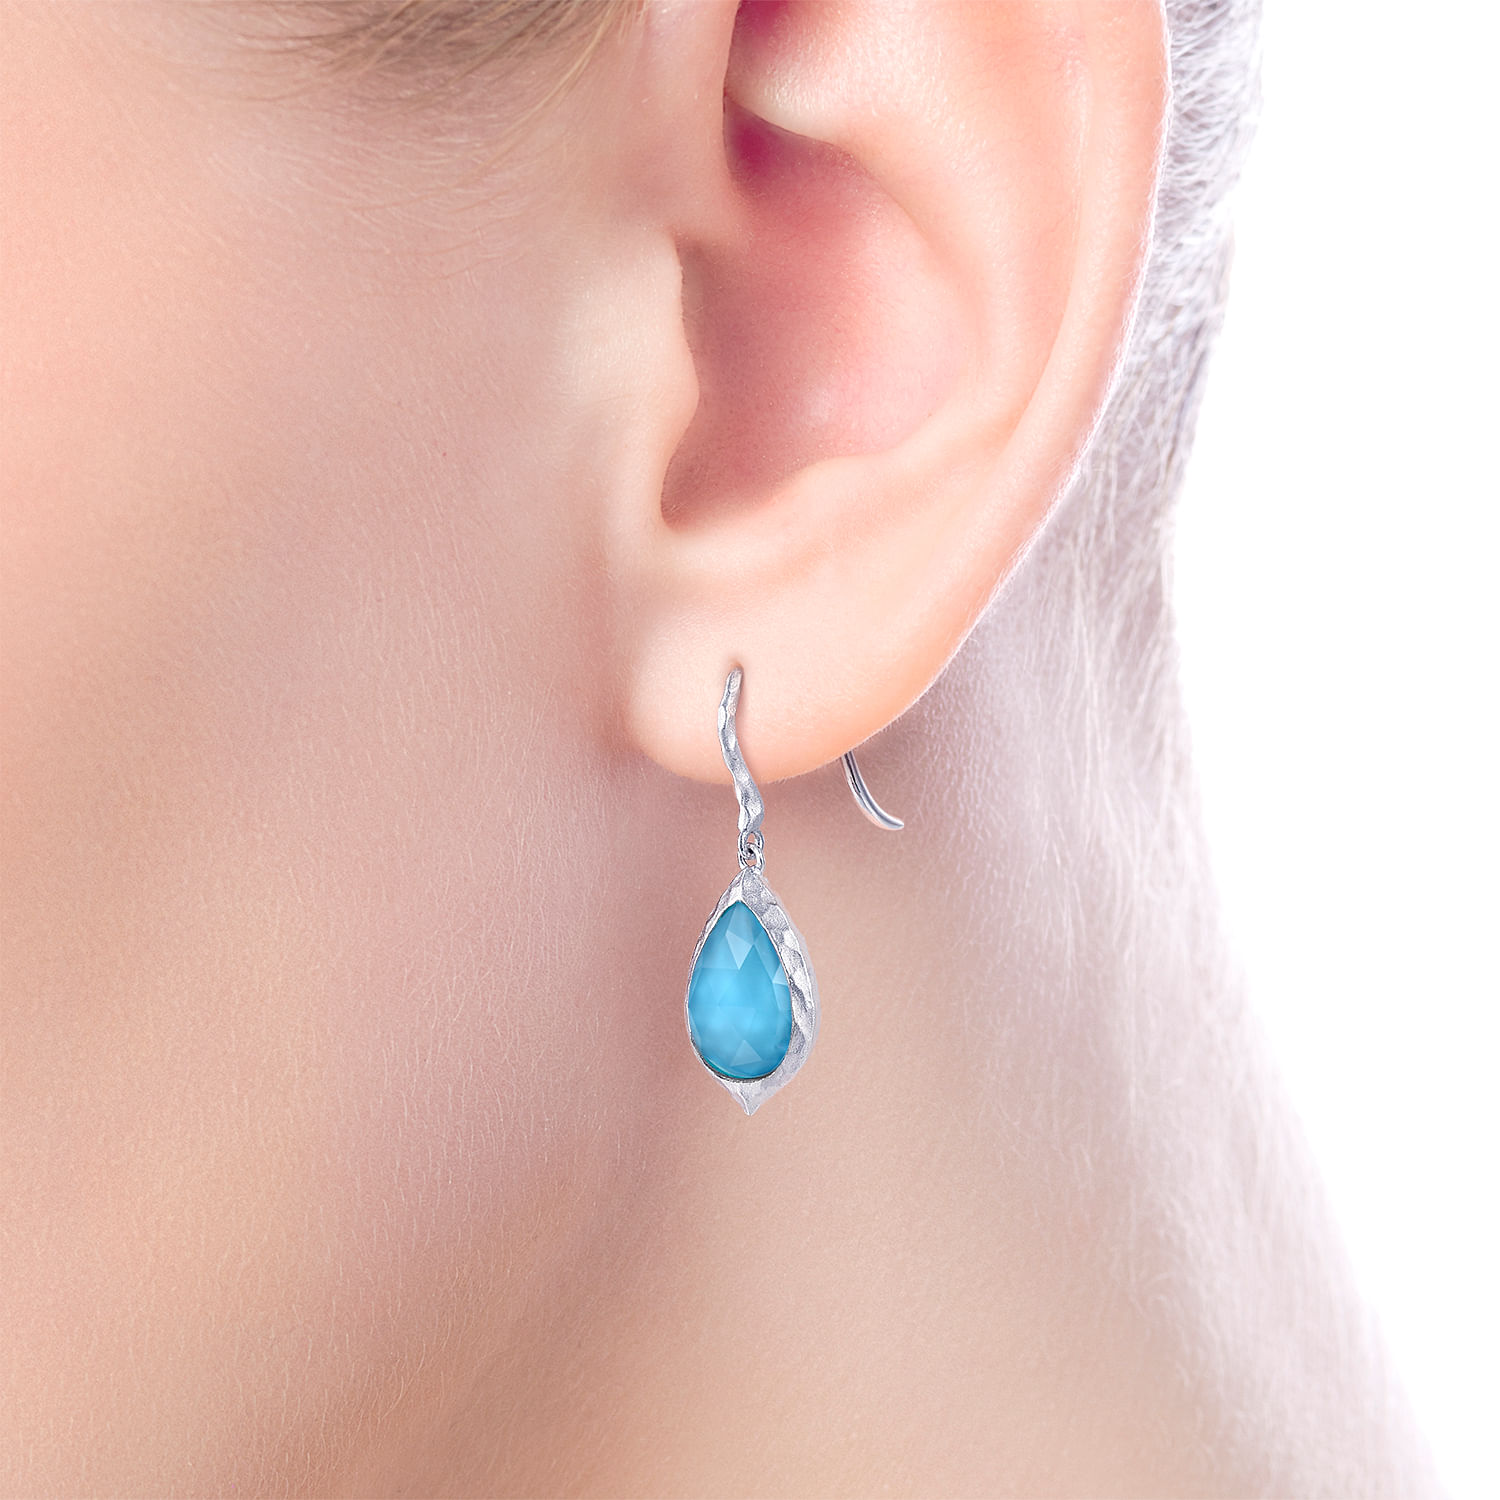 925 Sterling Silver Hammered Pear Shaped Rock Crystal/Turquoise Drop Earrings